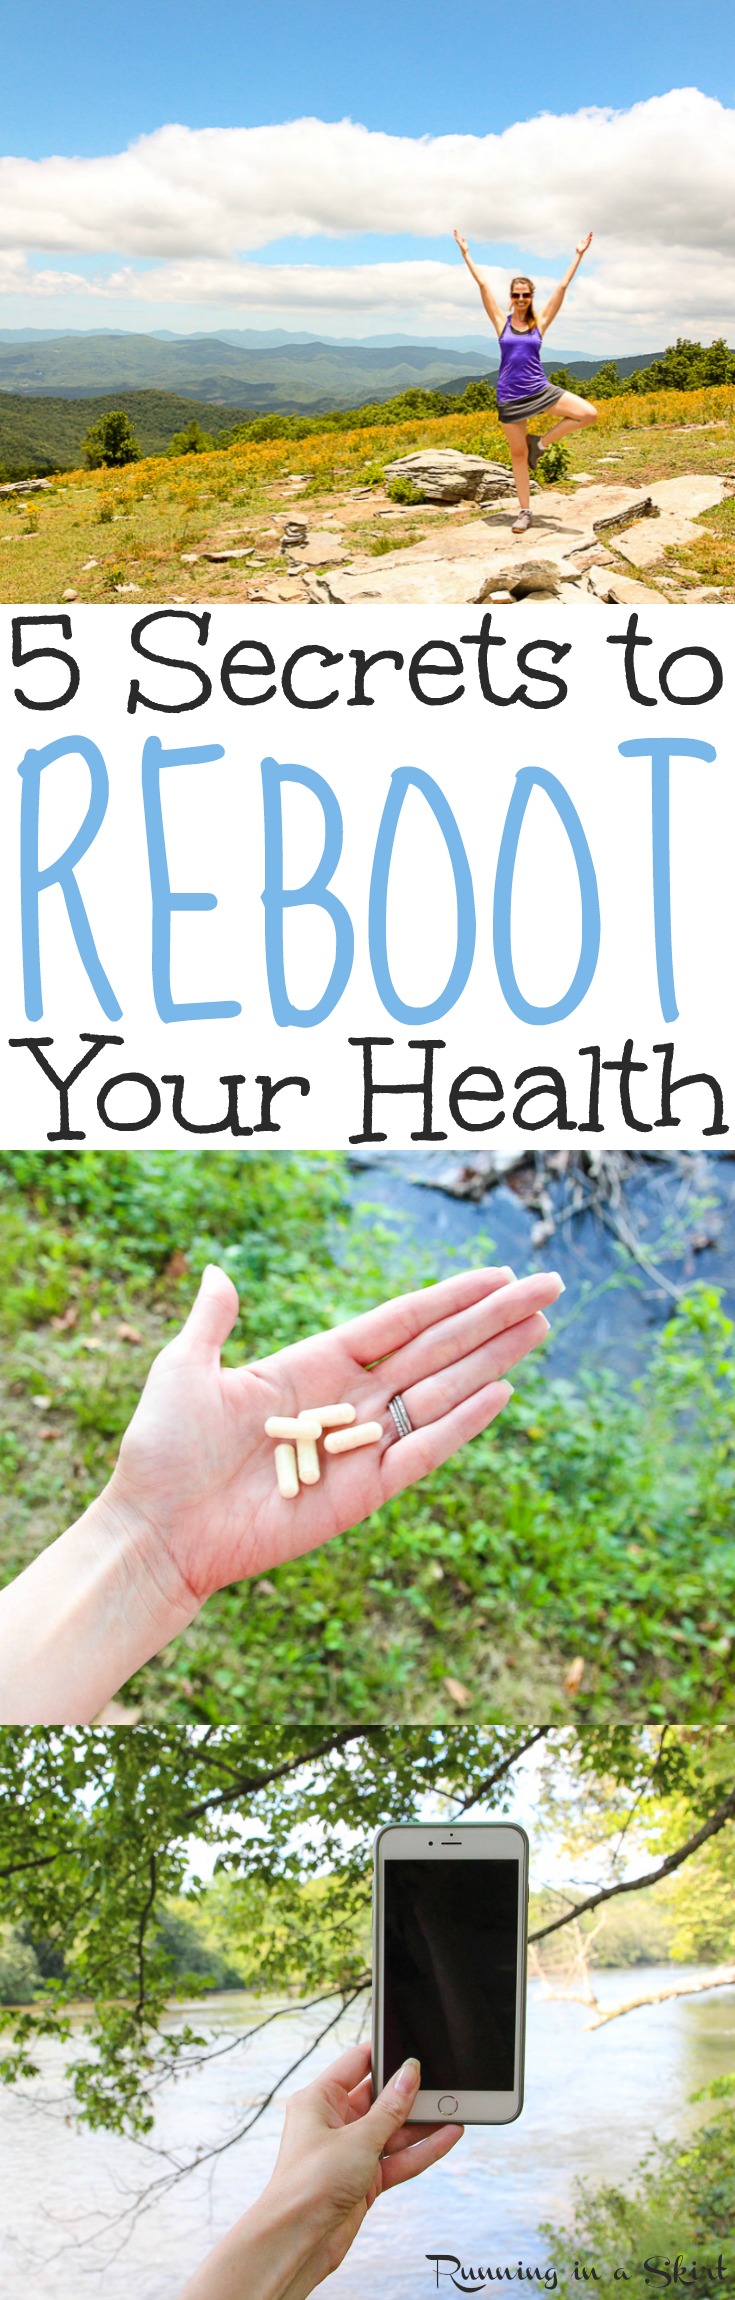 5 Health Secrets to Reboot Your Life!  Including simple motivation tips, daily healthy habits and benefits of the best probiotics. Also looks at natural remedies and ways eating better can make you feel healthier and happier in your own skin. / Running in a Skirt via @juliewunder